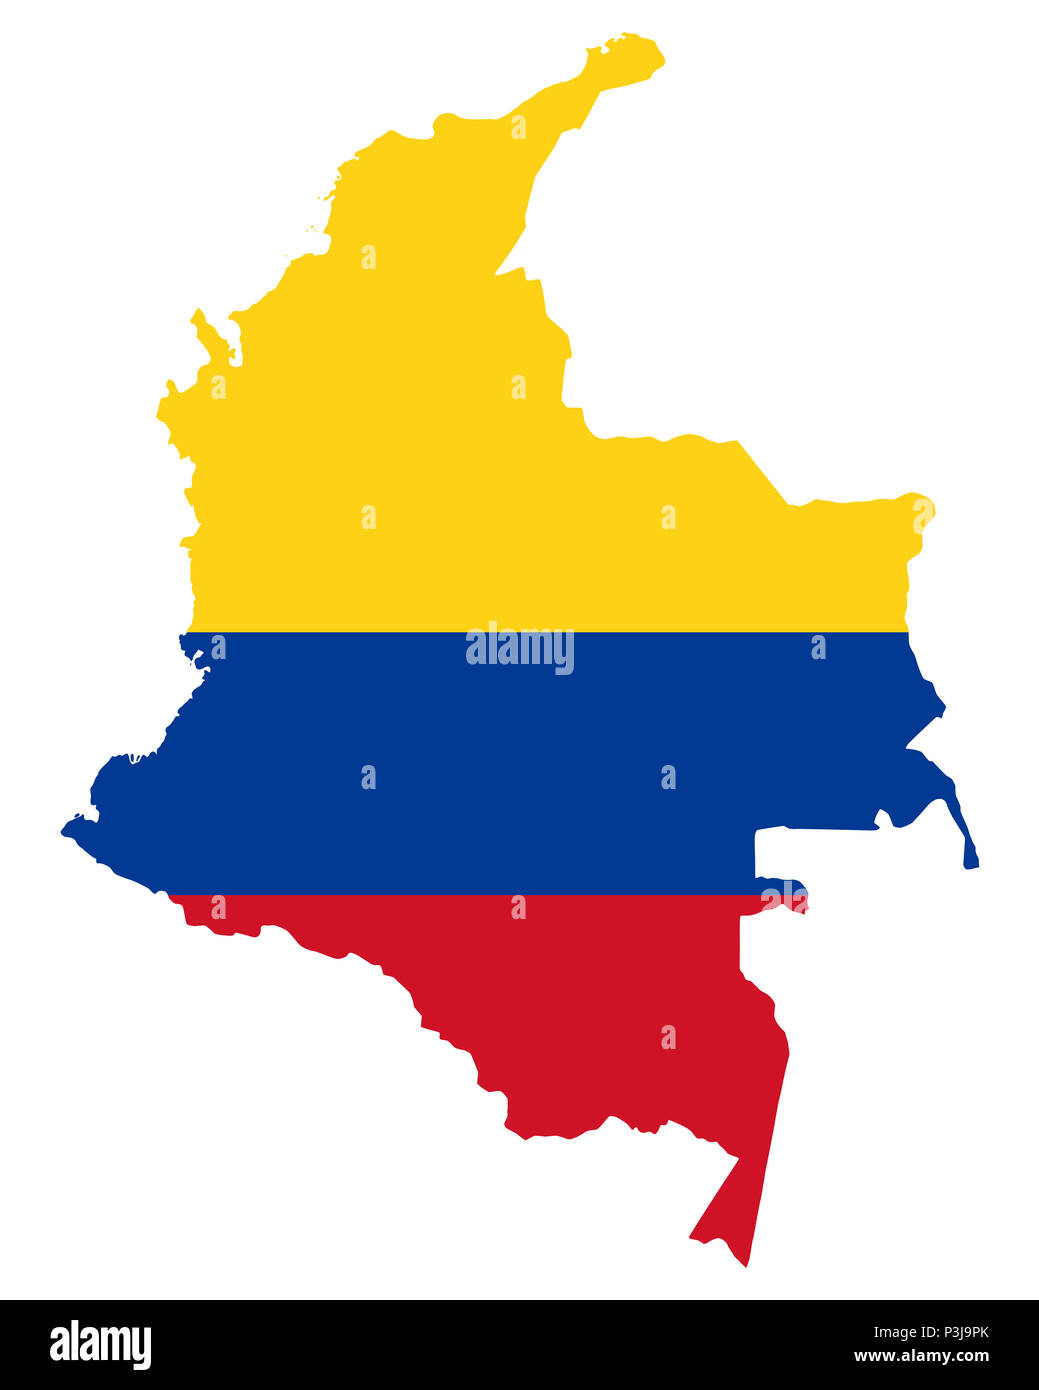 National flag of Colombia in the country silhouette. Colombian state ensign. Horizontal tricolour of yellow, blue and red. Republic in South America. Stock Photo